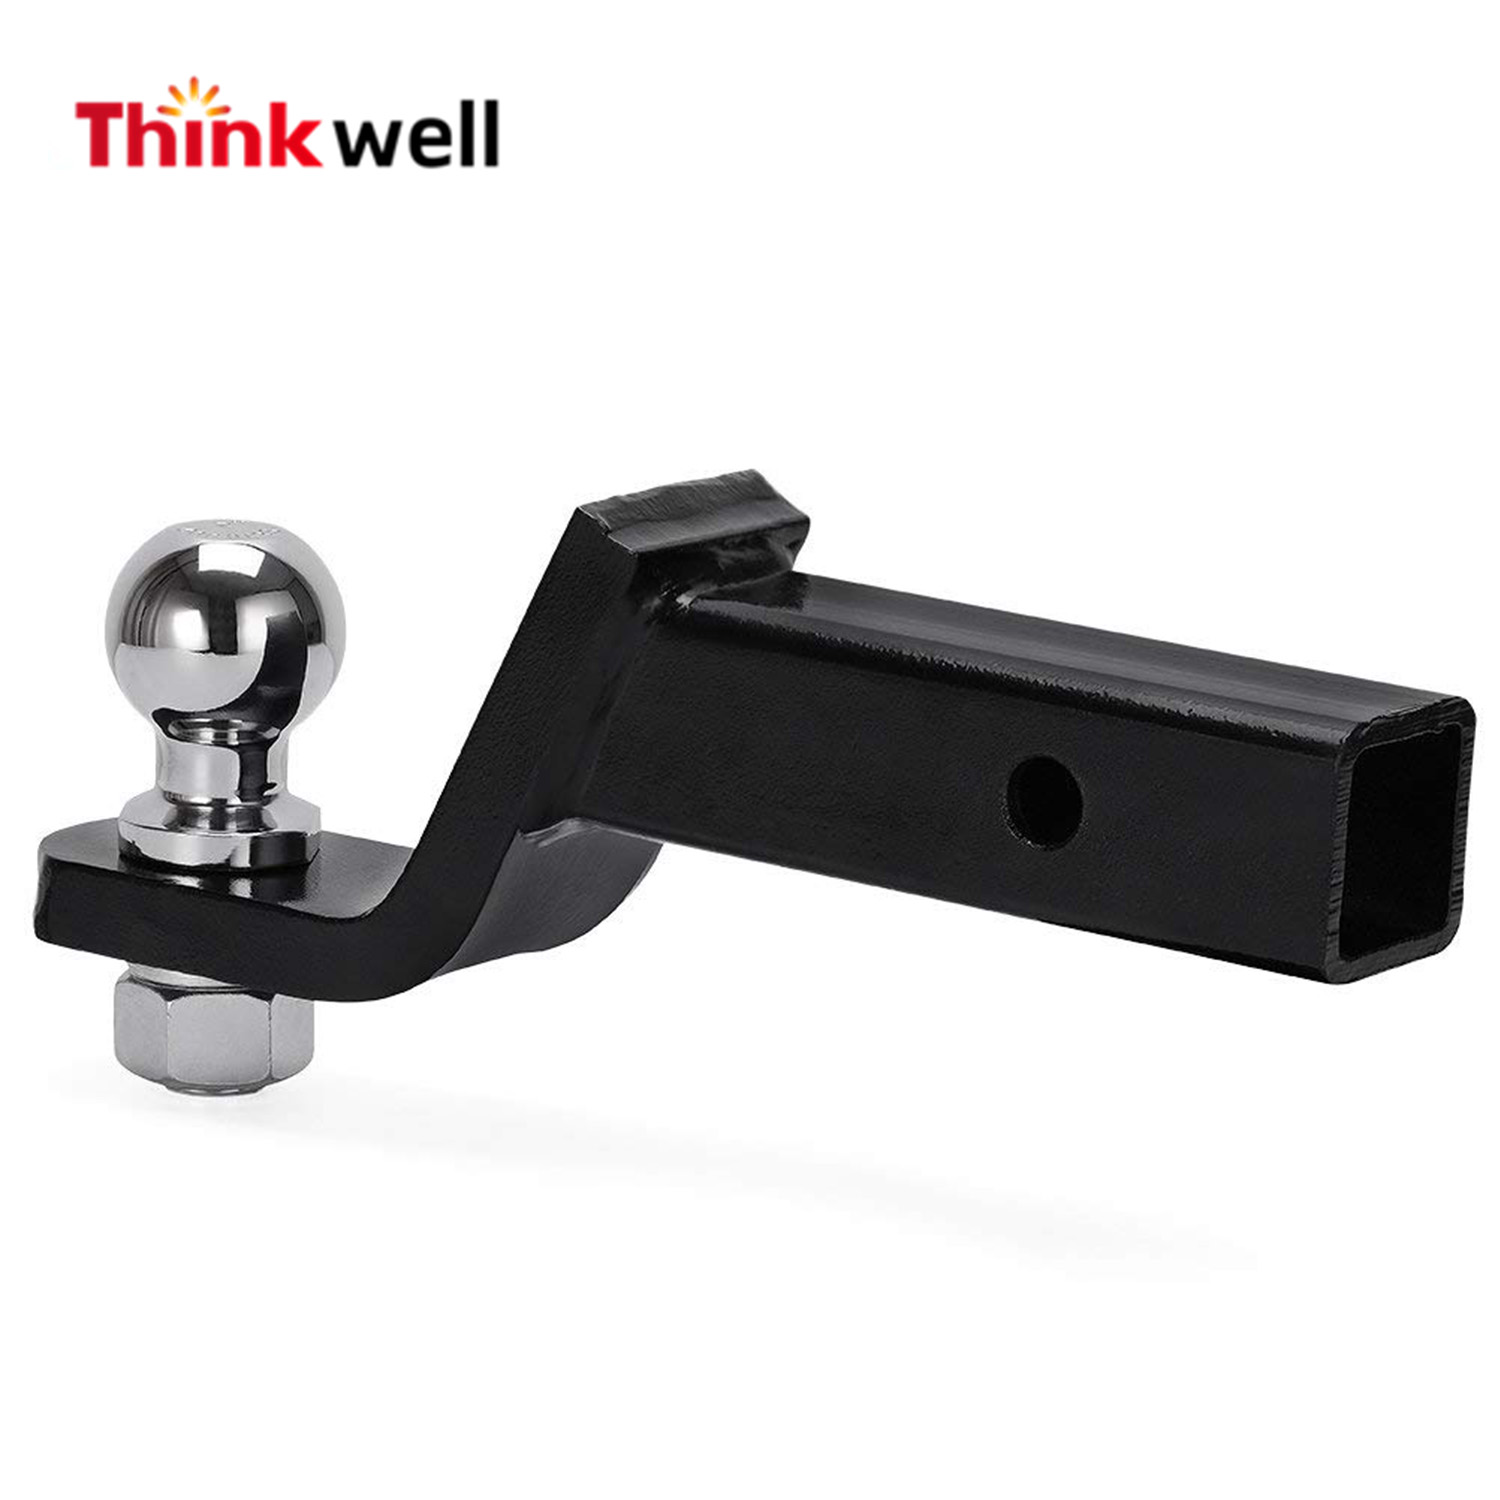 Trailer Hitch Mount With 2" Hitch Ball